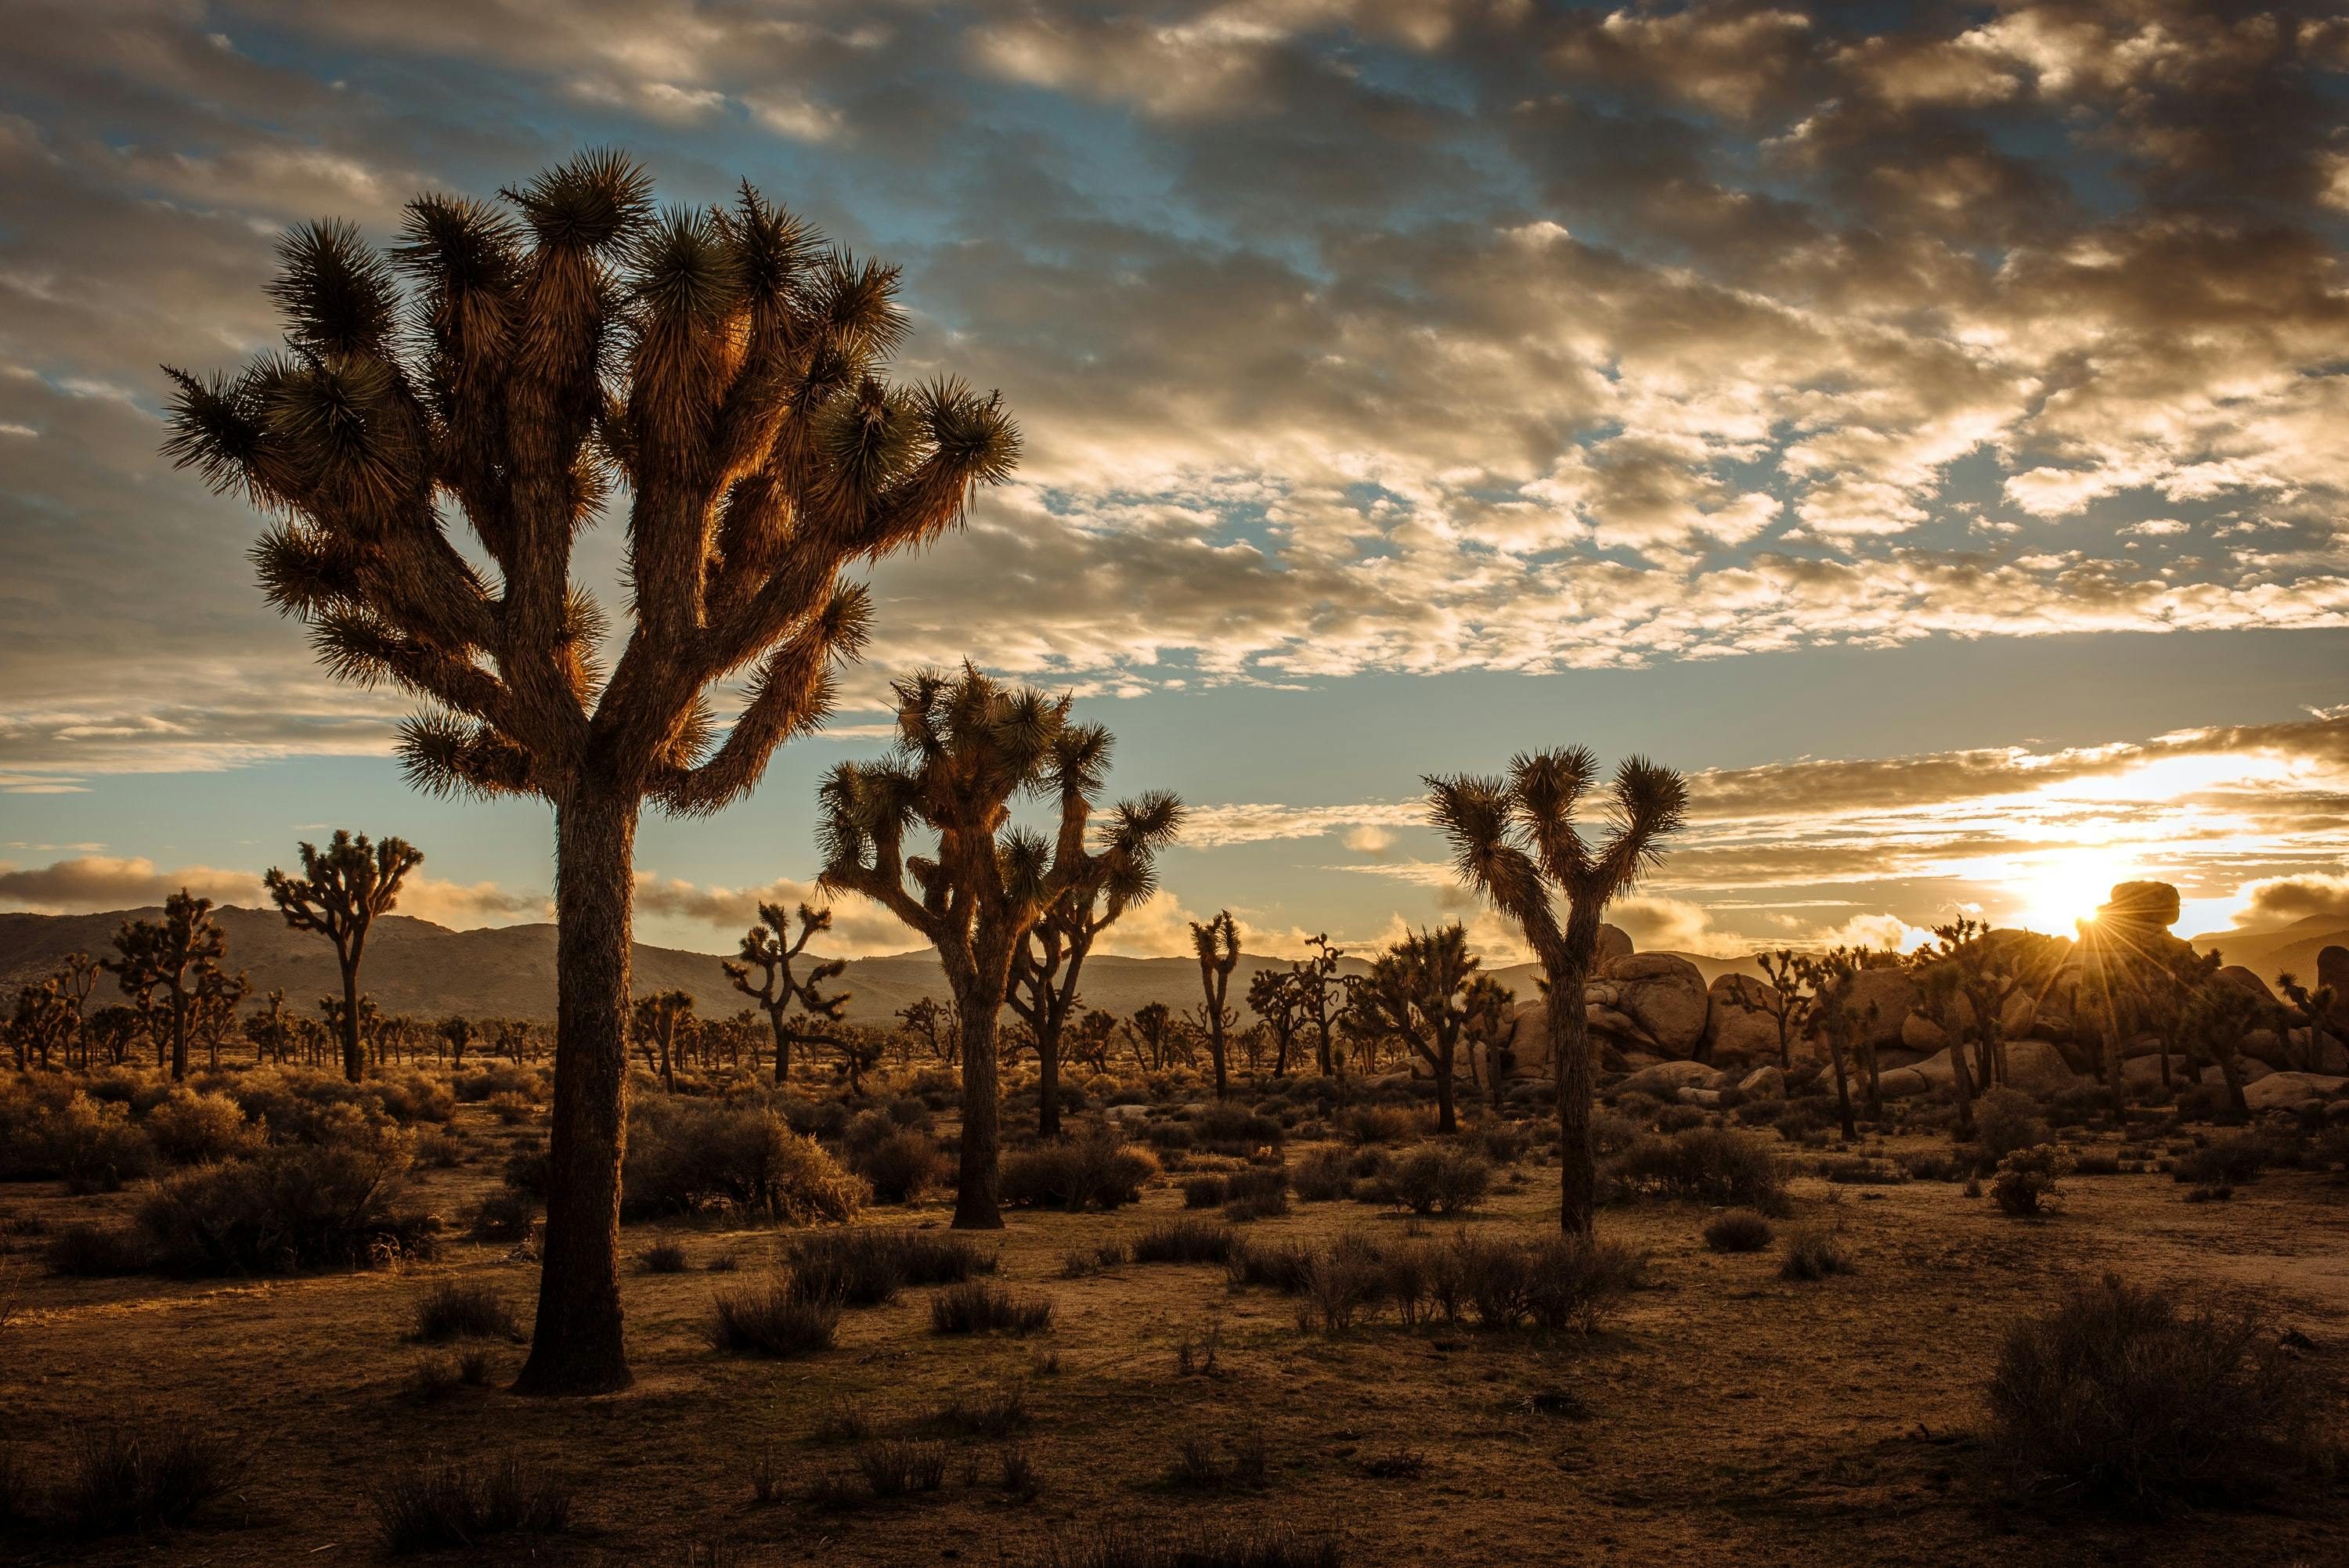 Day trips from LA to Joshua Tree